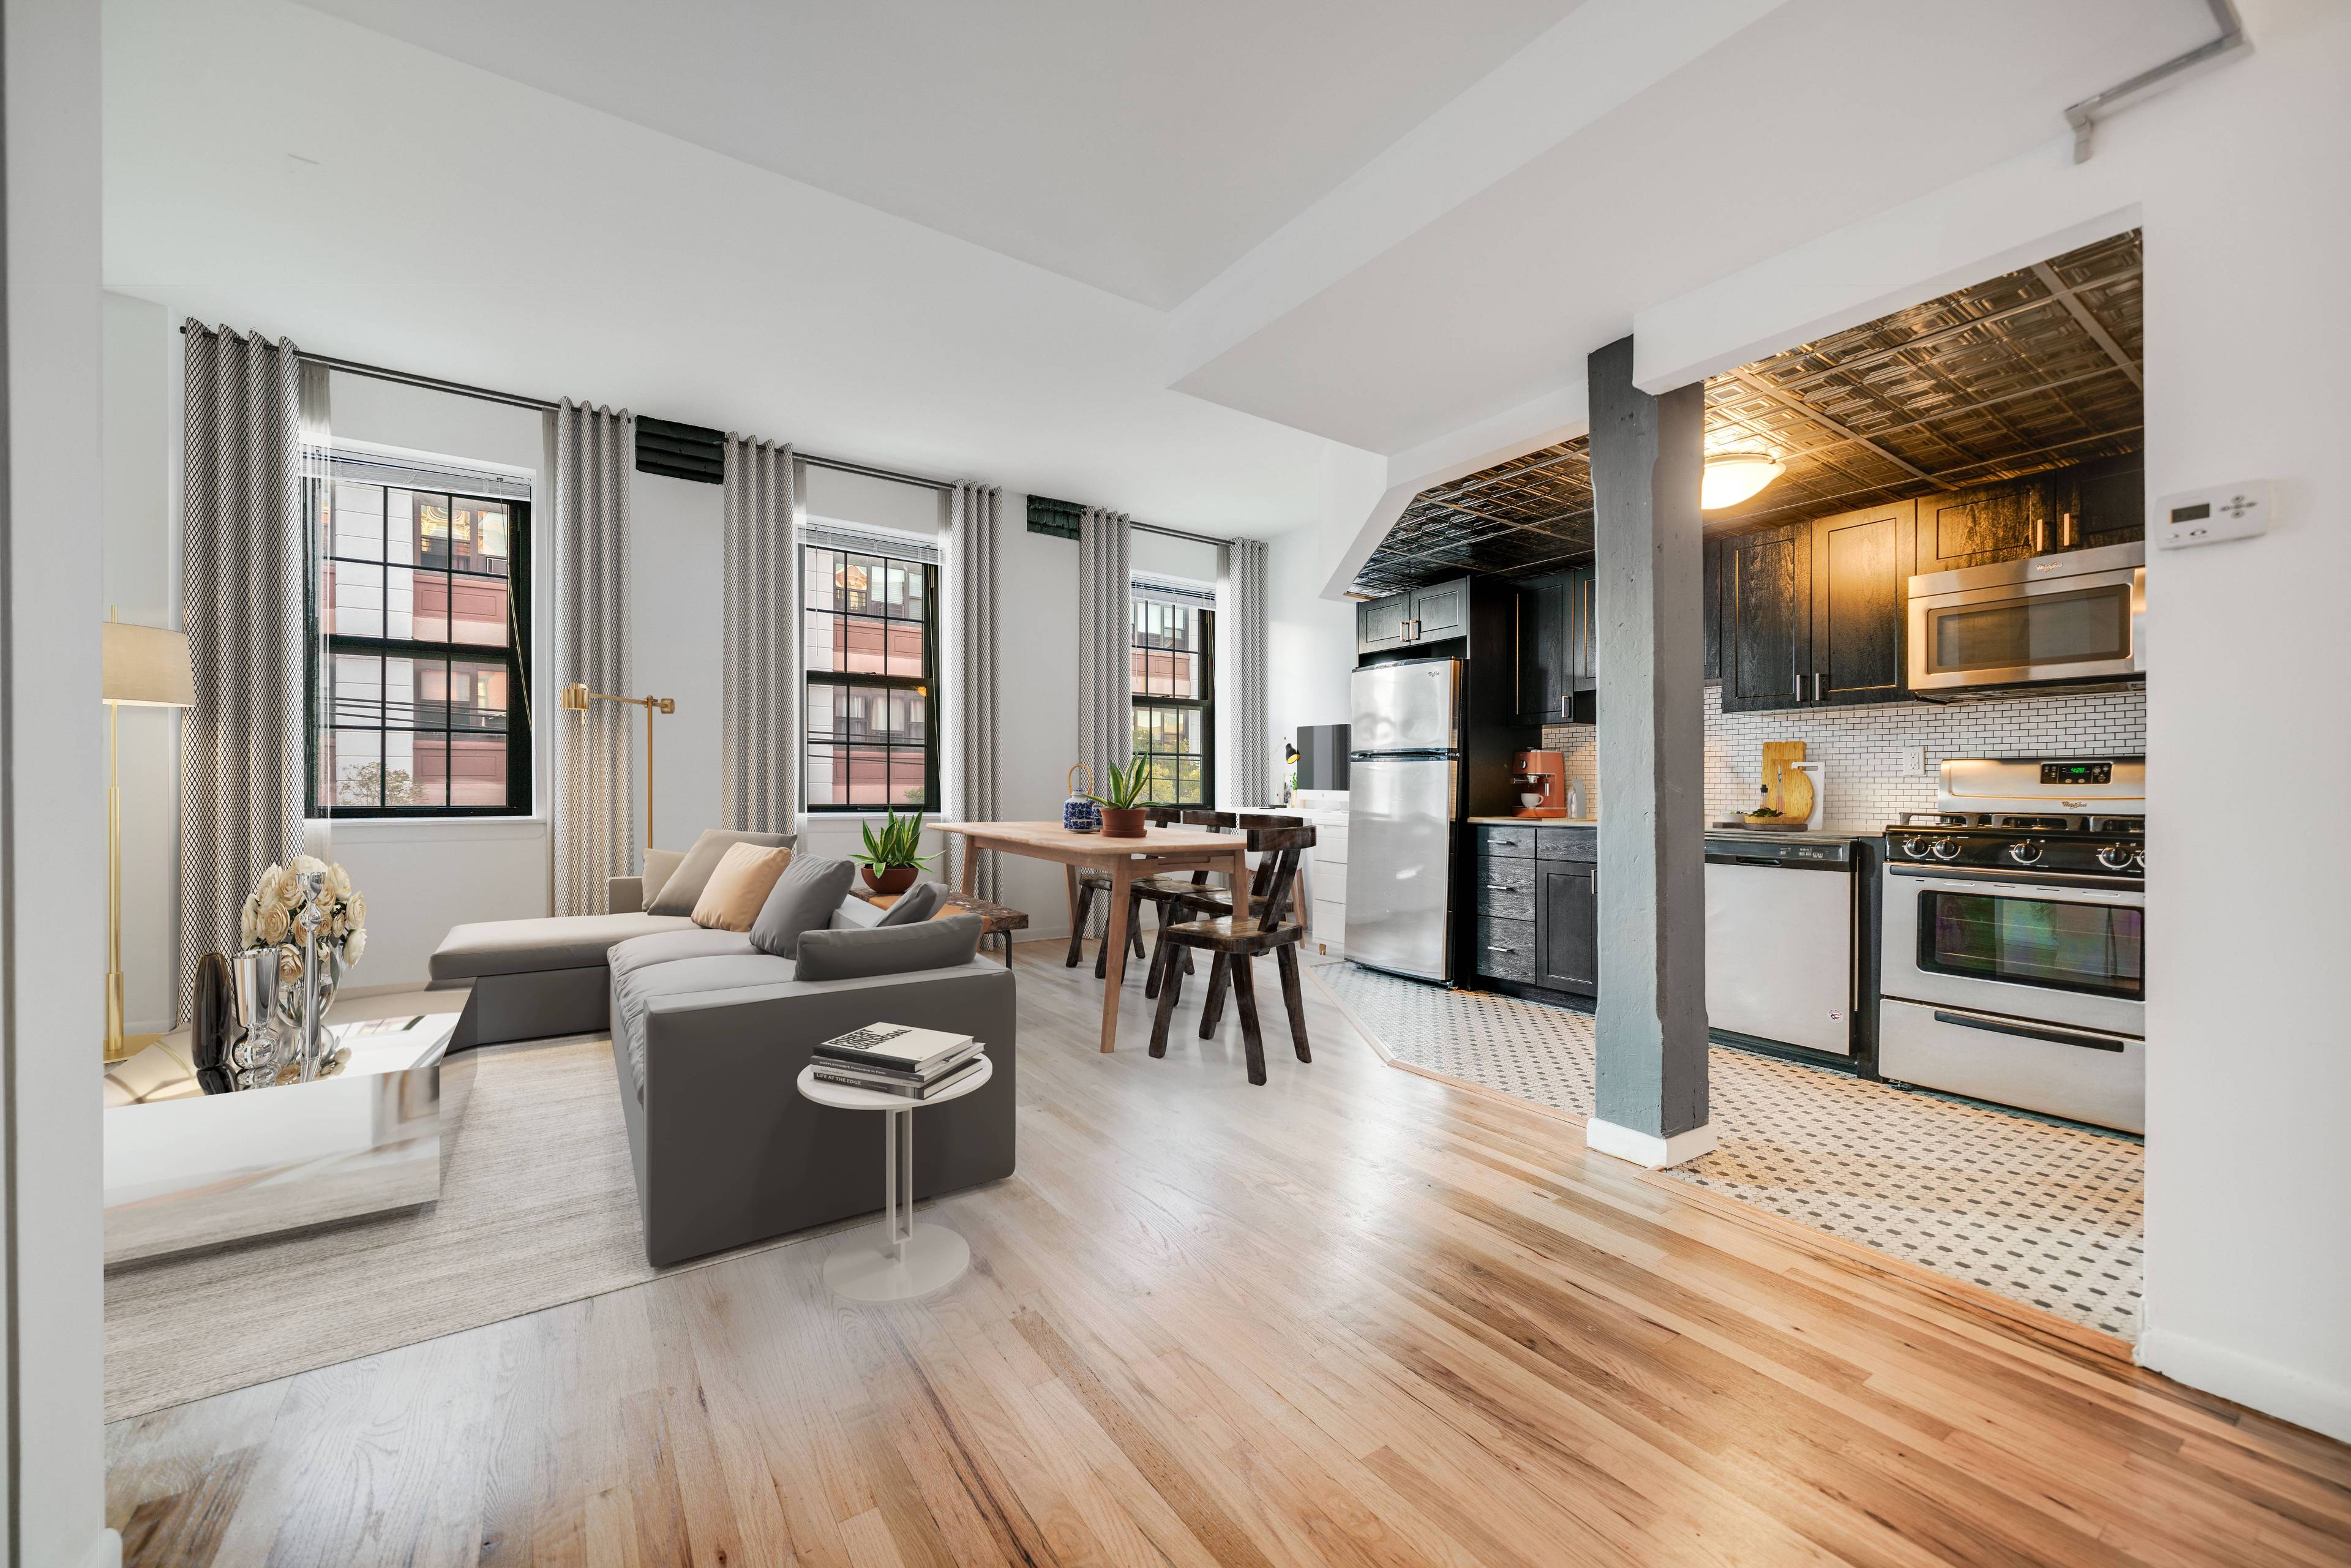 Beautiful Open and Spacious 2 Bedroom 1.5 Bathroom Soho Loft Duplex located at the Grand Adams in Downtown Hoboken! Laundry In Unit! Elevator Building!